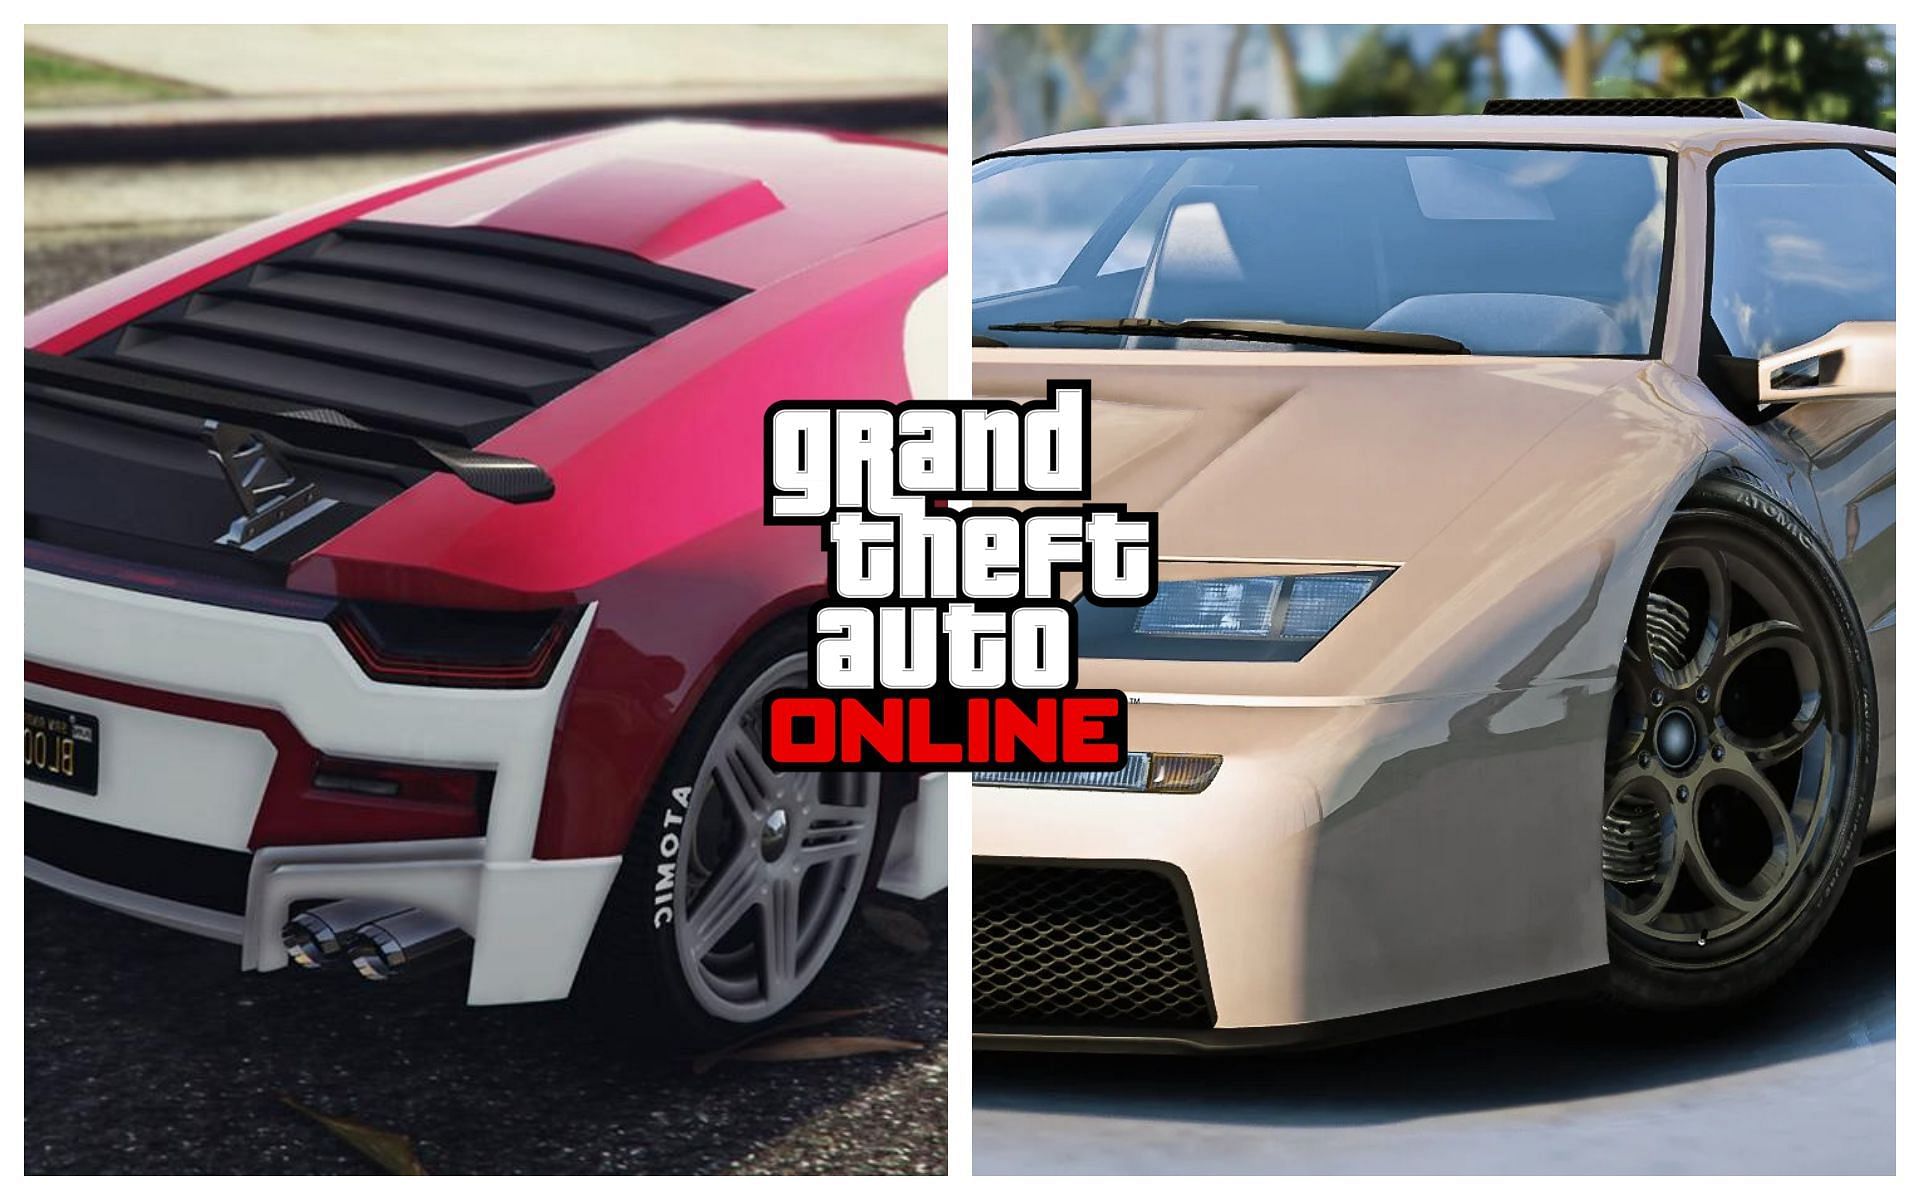 Players this week have two new prizes (Images via GTAall/Voit Turyv, deadman23 et al.)